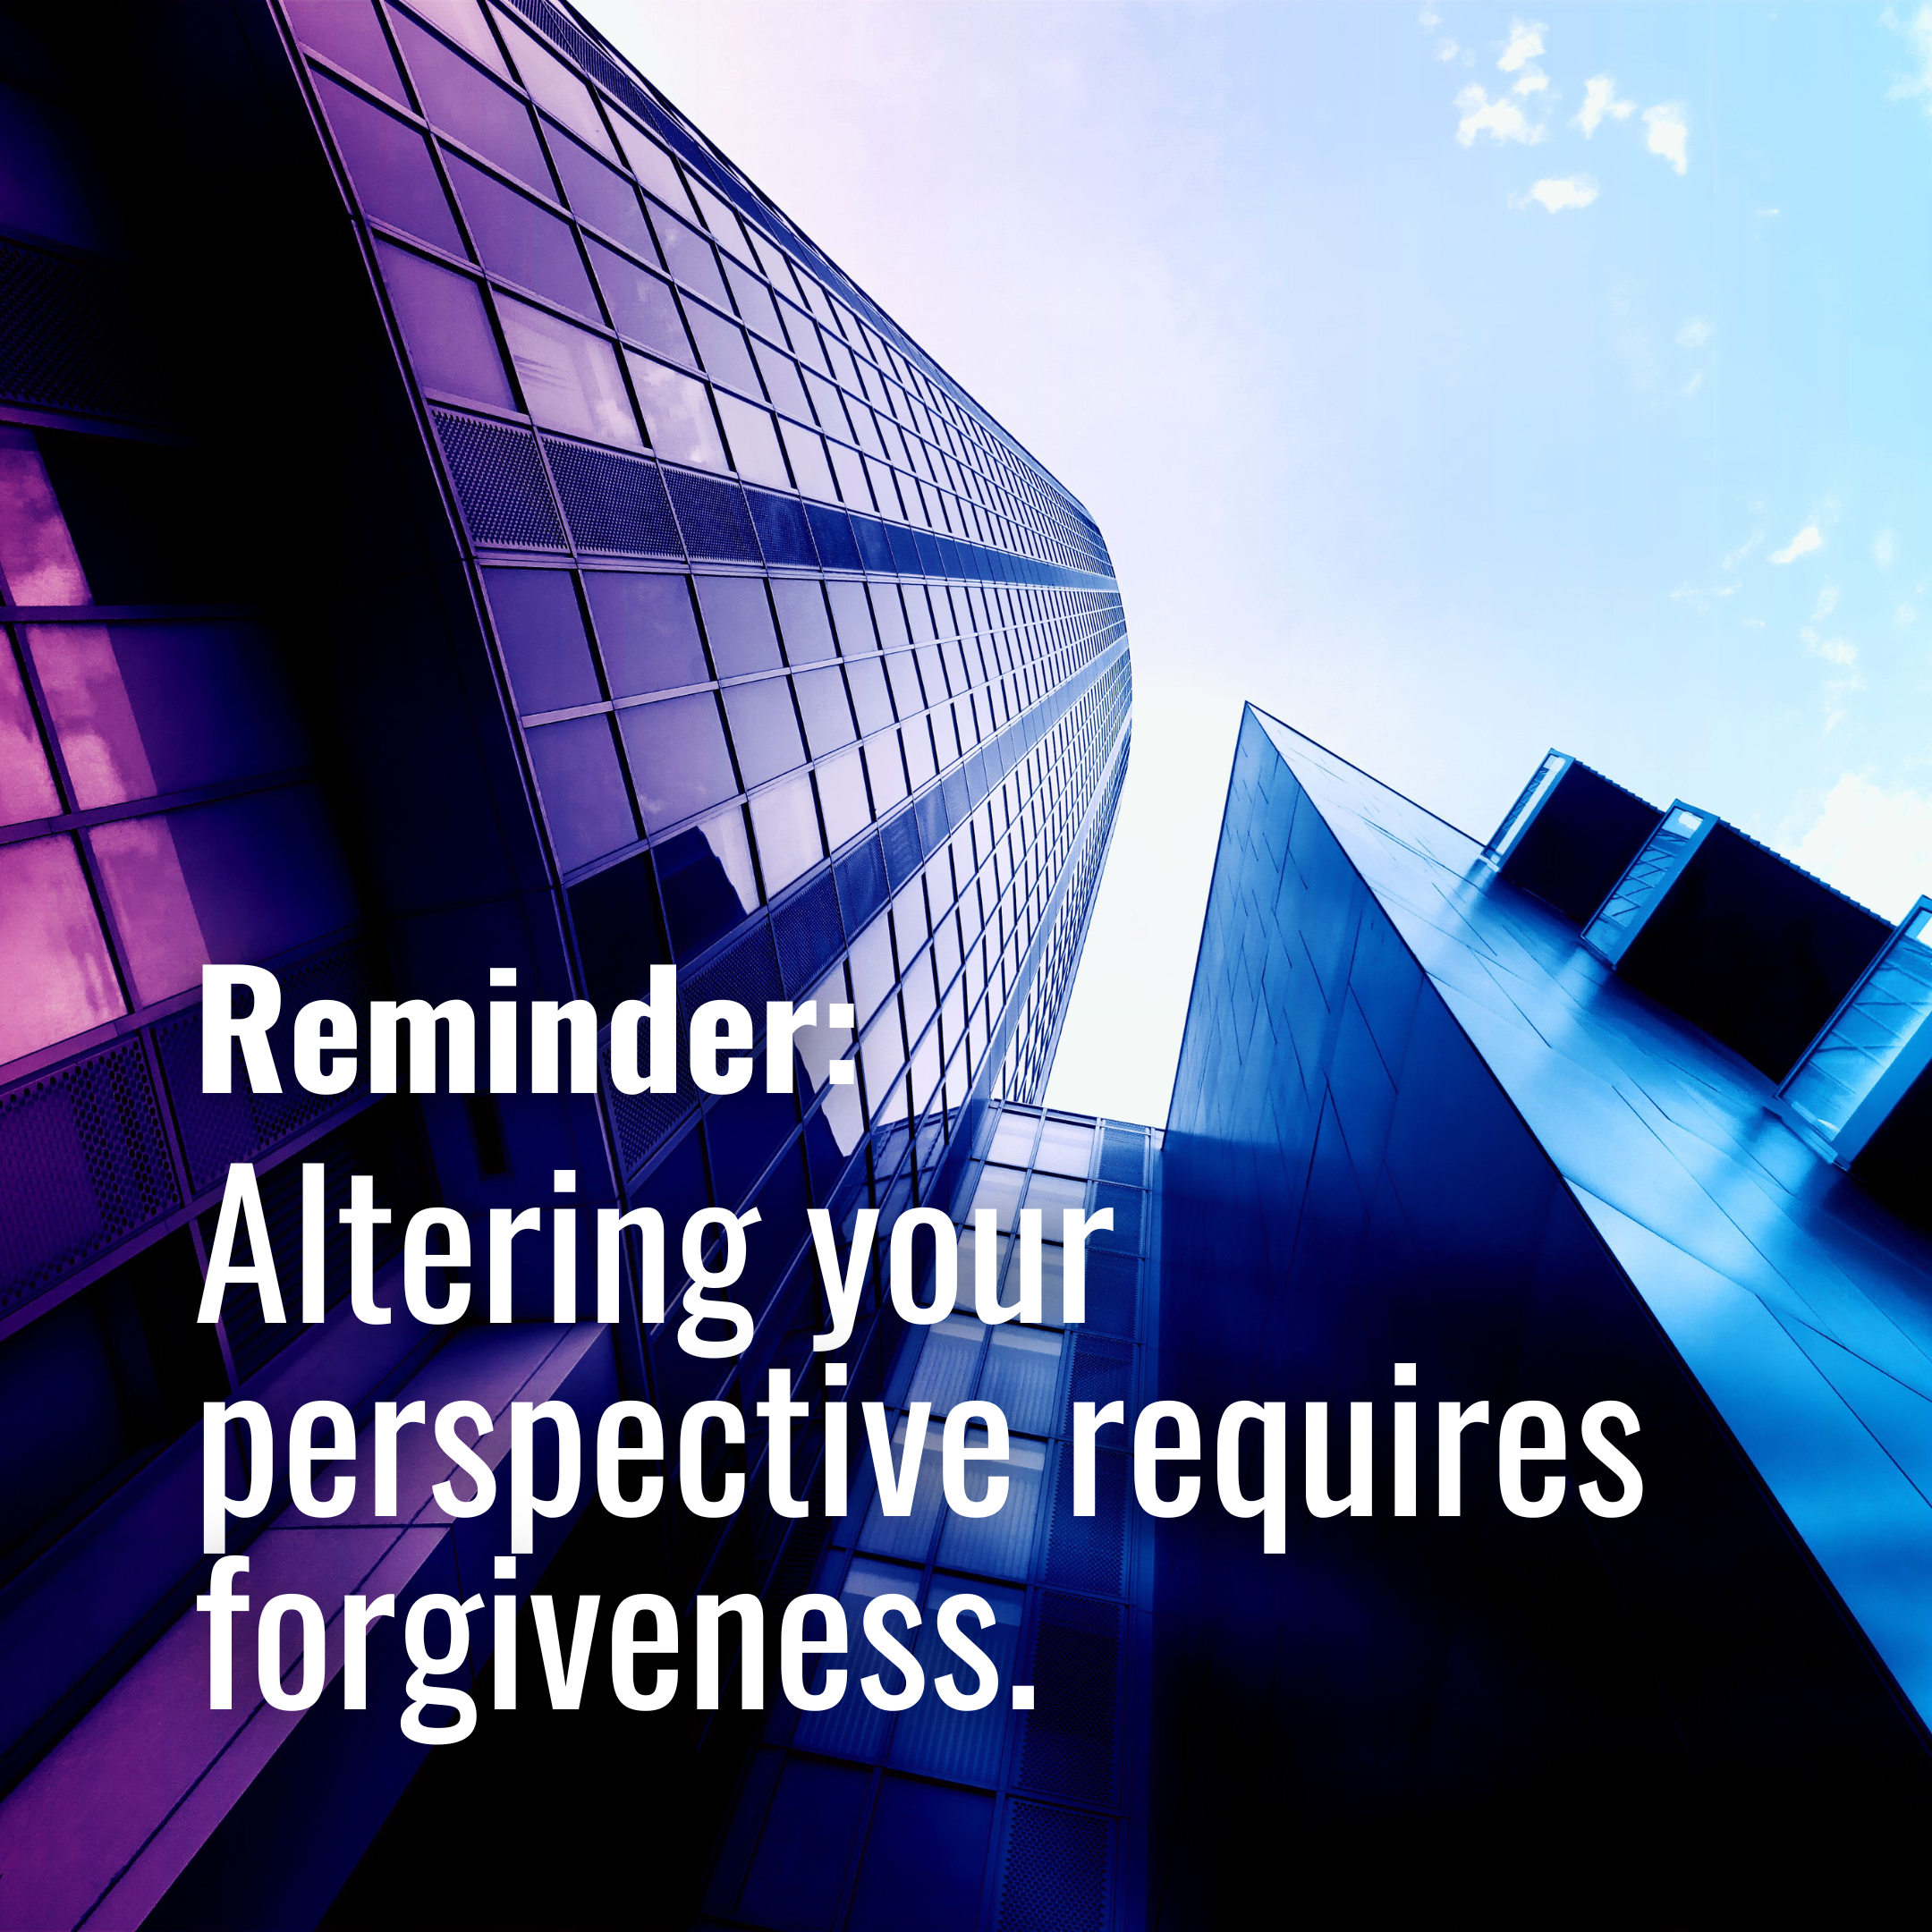 Altering your perspective requires forgiveness 🙏